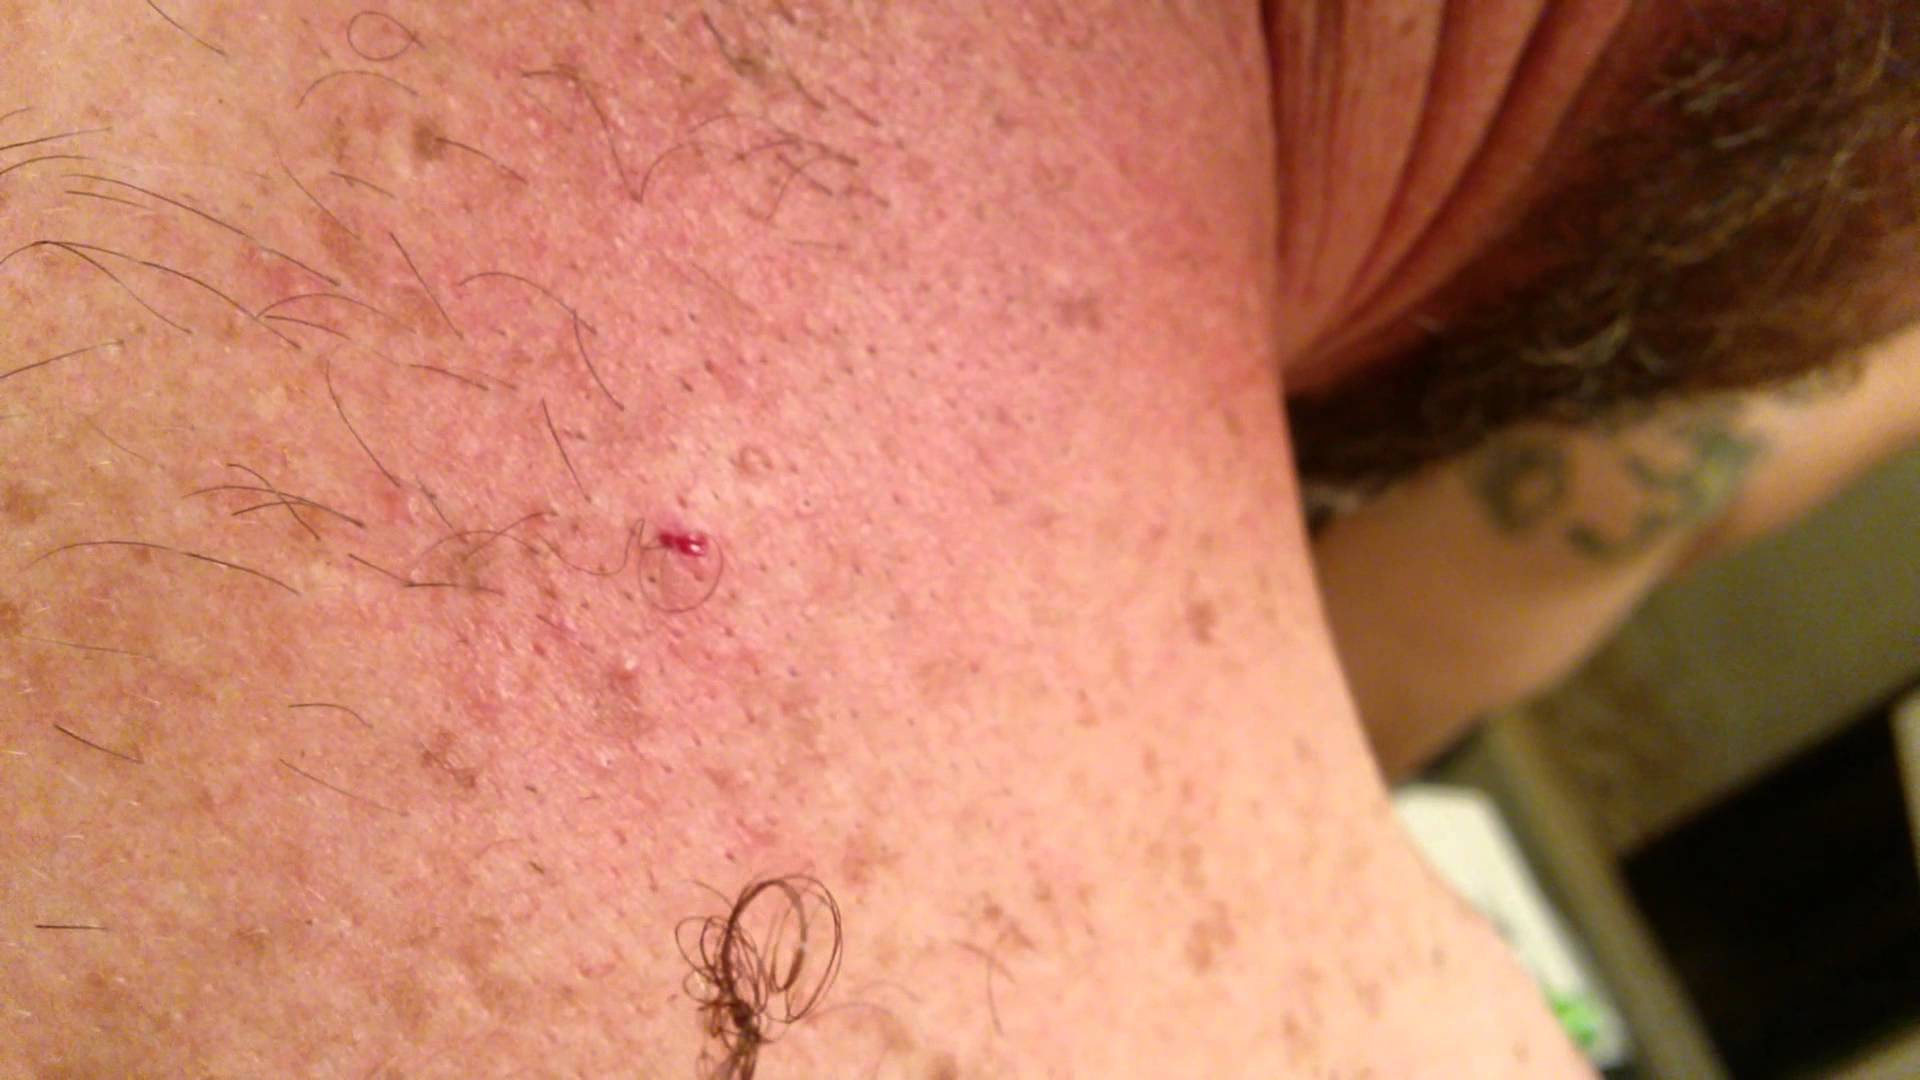 Can an ingrown hair go away on its own? 